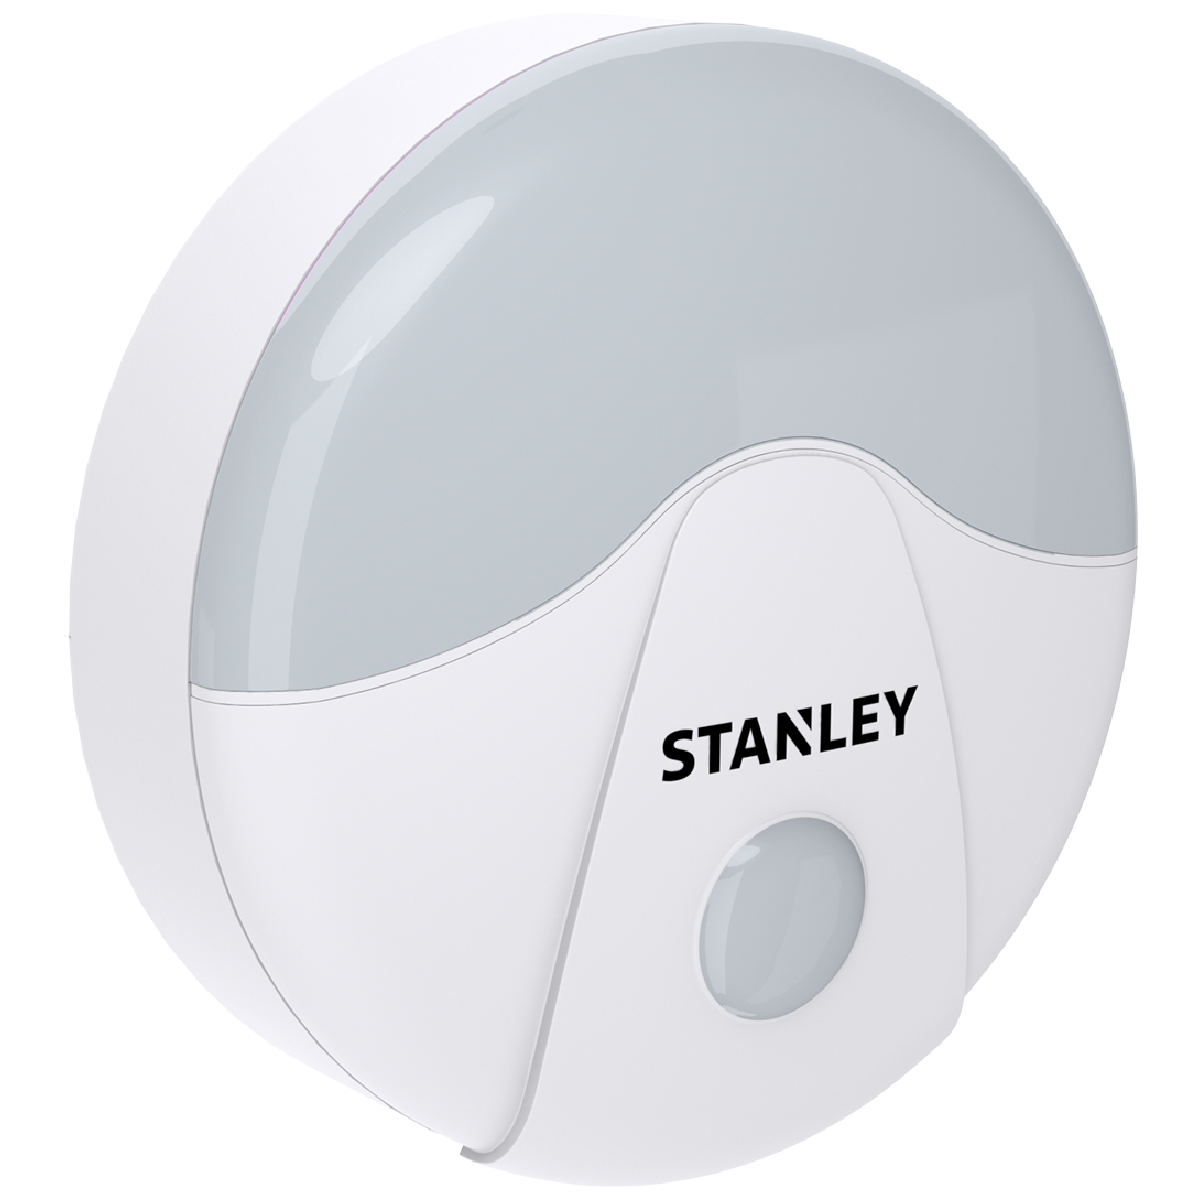 STANLEY MOTION-ACTIVATED SENSOR LIGHT - 6-LED - Stanley Electrical Accessories